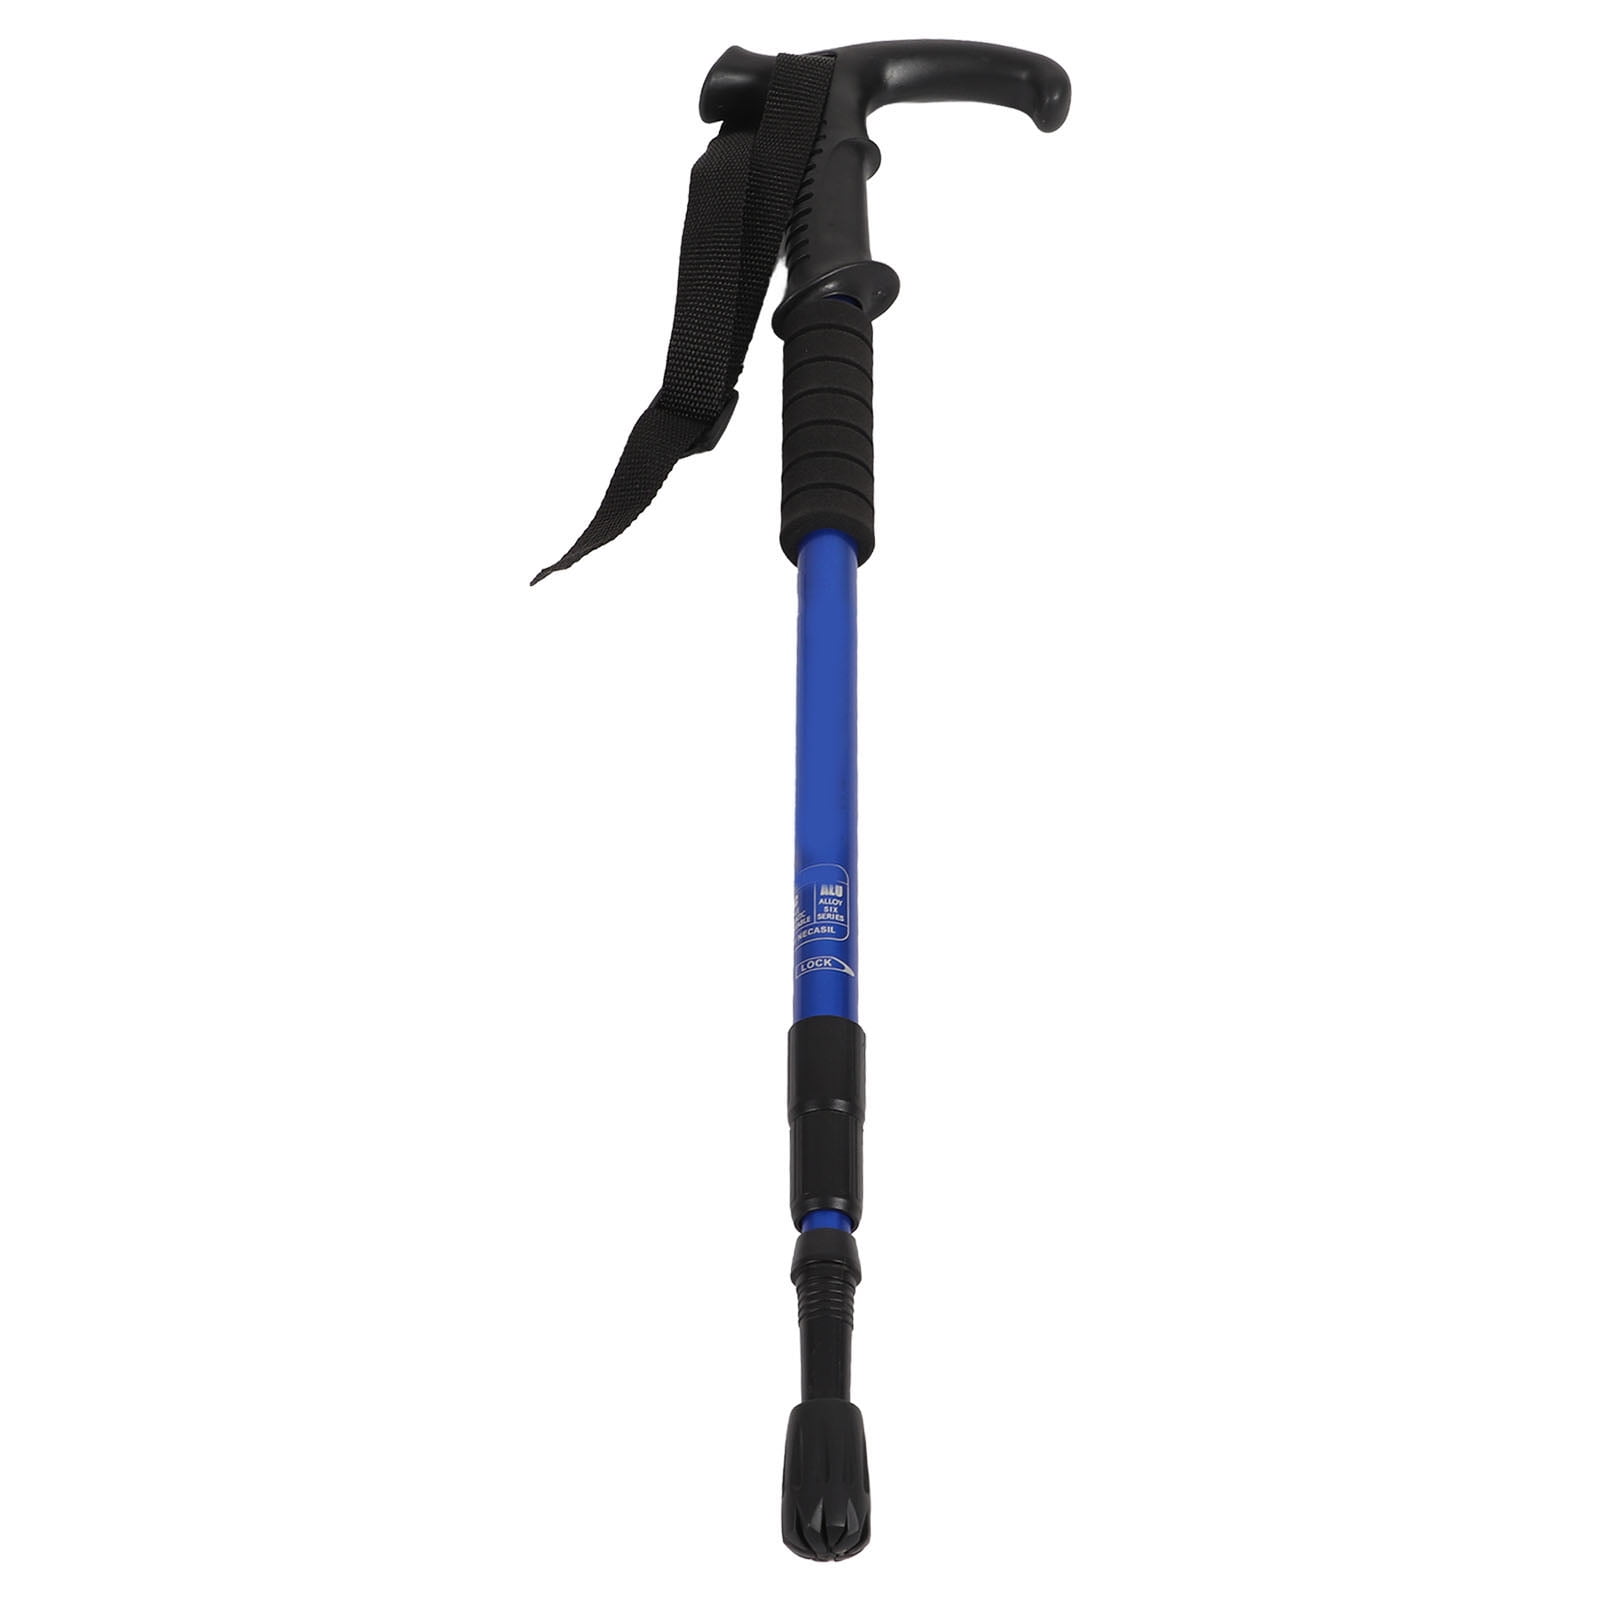 Telescopic Swing Stick,Handle Stick Foldable Climbing Walking Stick Portable Telescopic Swing Stick,Suitable For Male And Female Outdoor Self Protection 